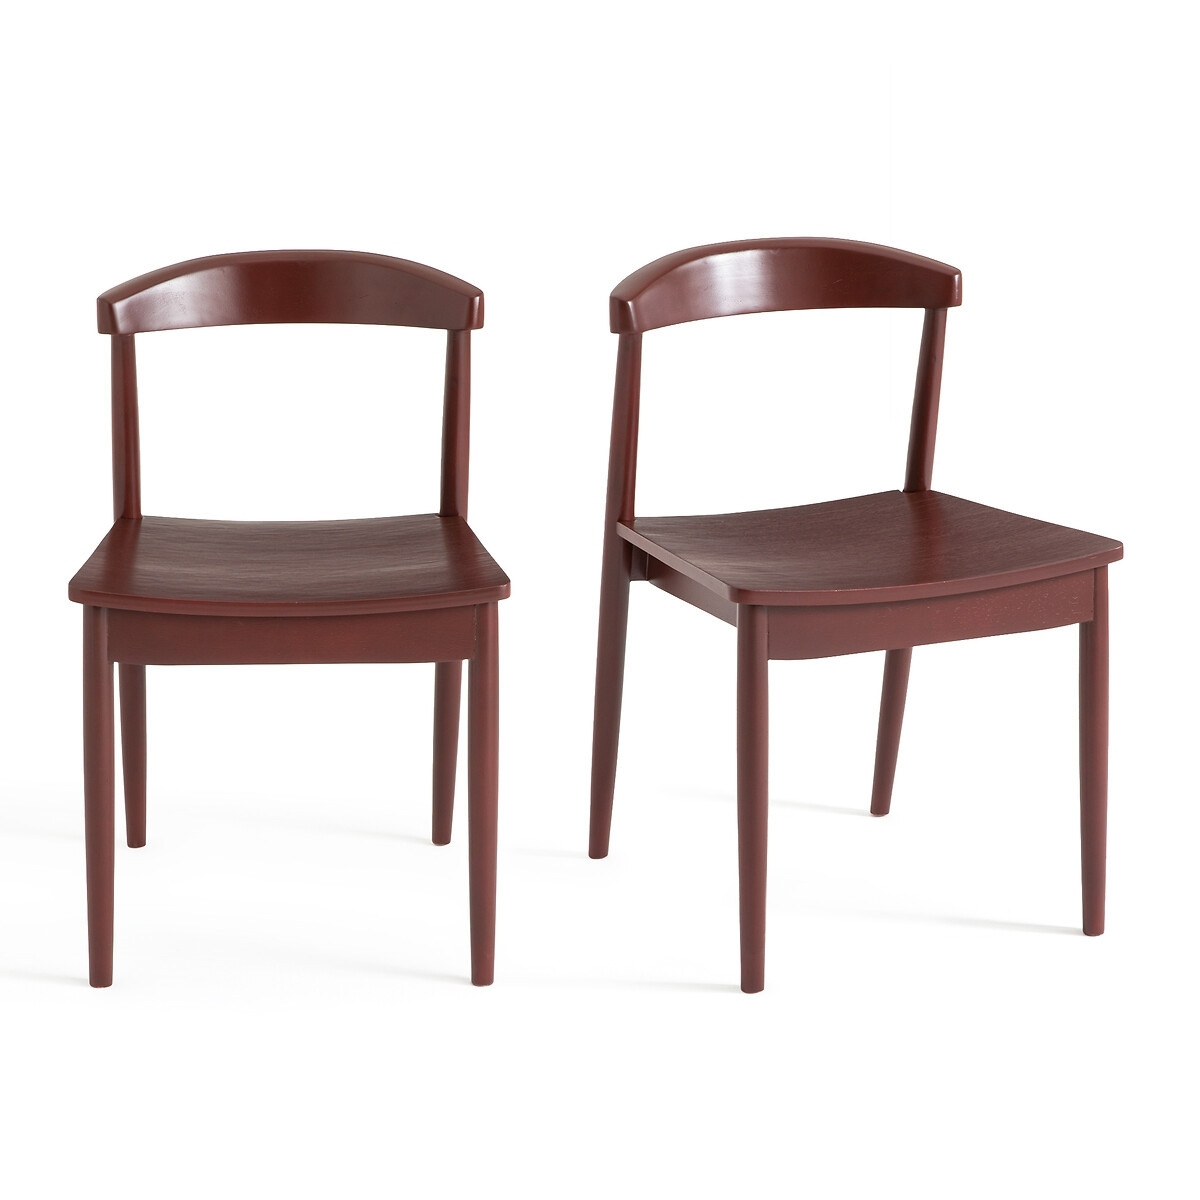 Set of 2 Galb Wooden Chairs - image 1